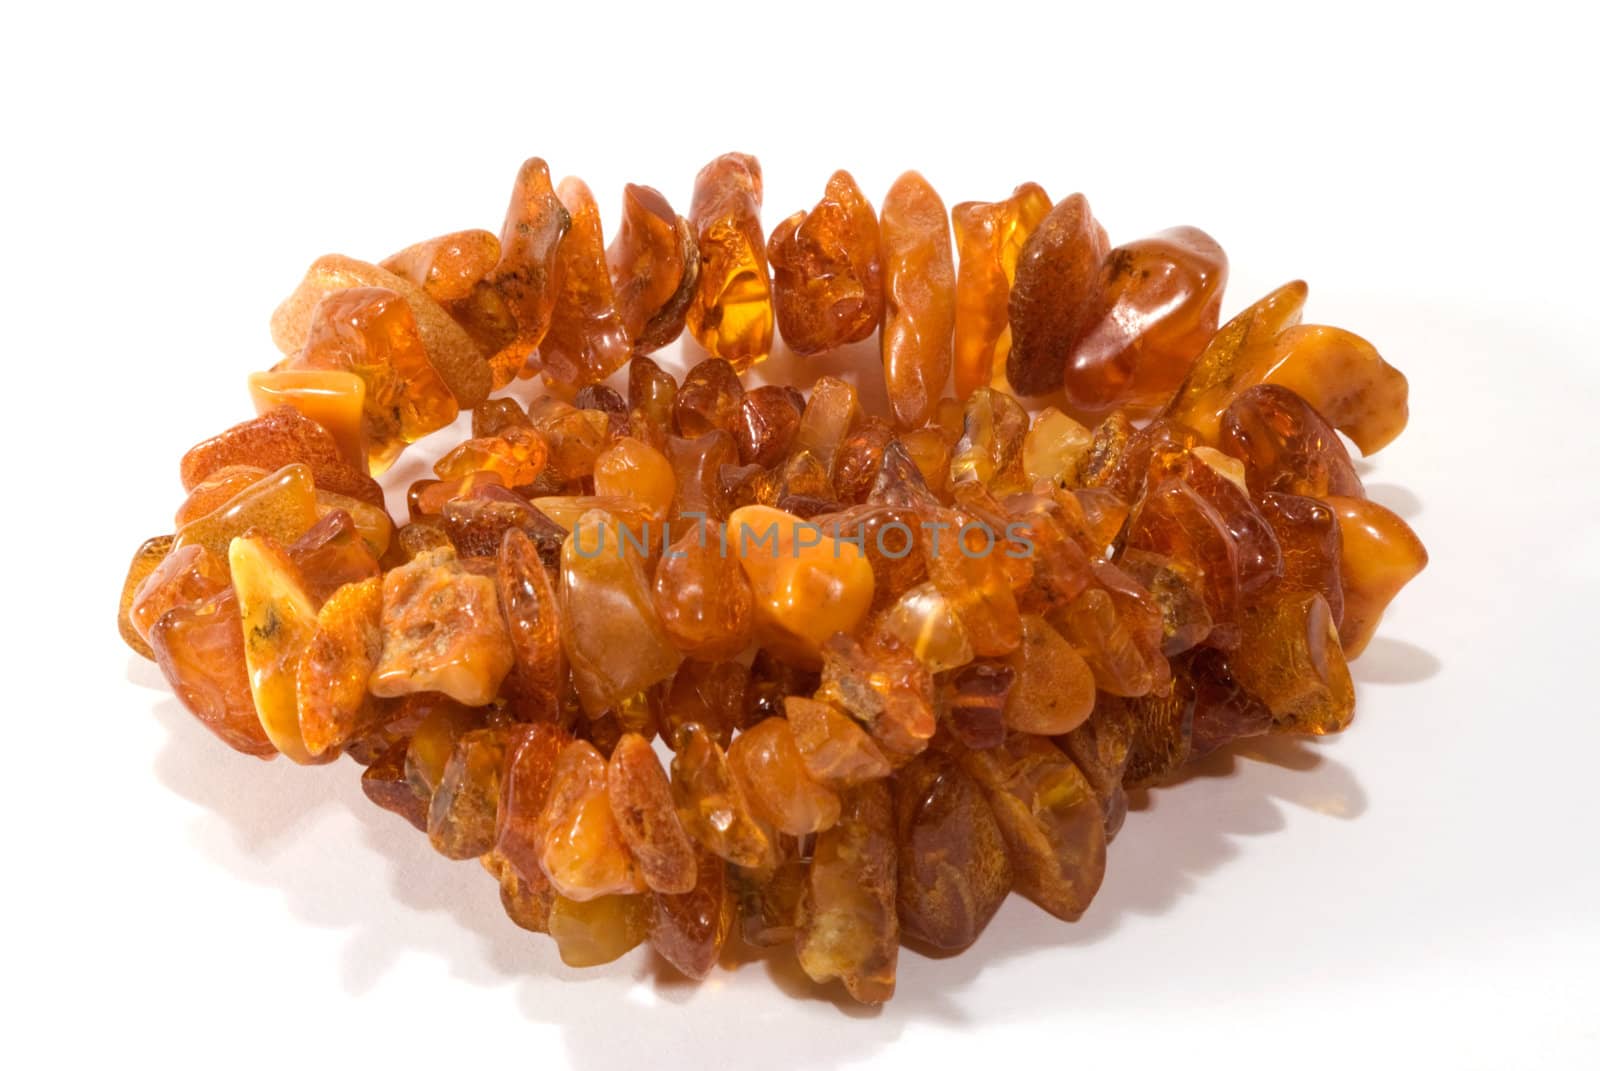 thread of amber bead on white background. close-up.